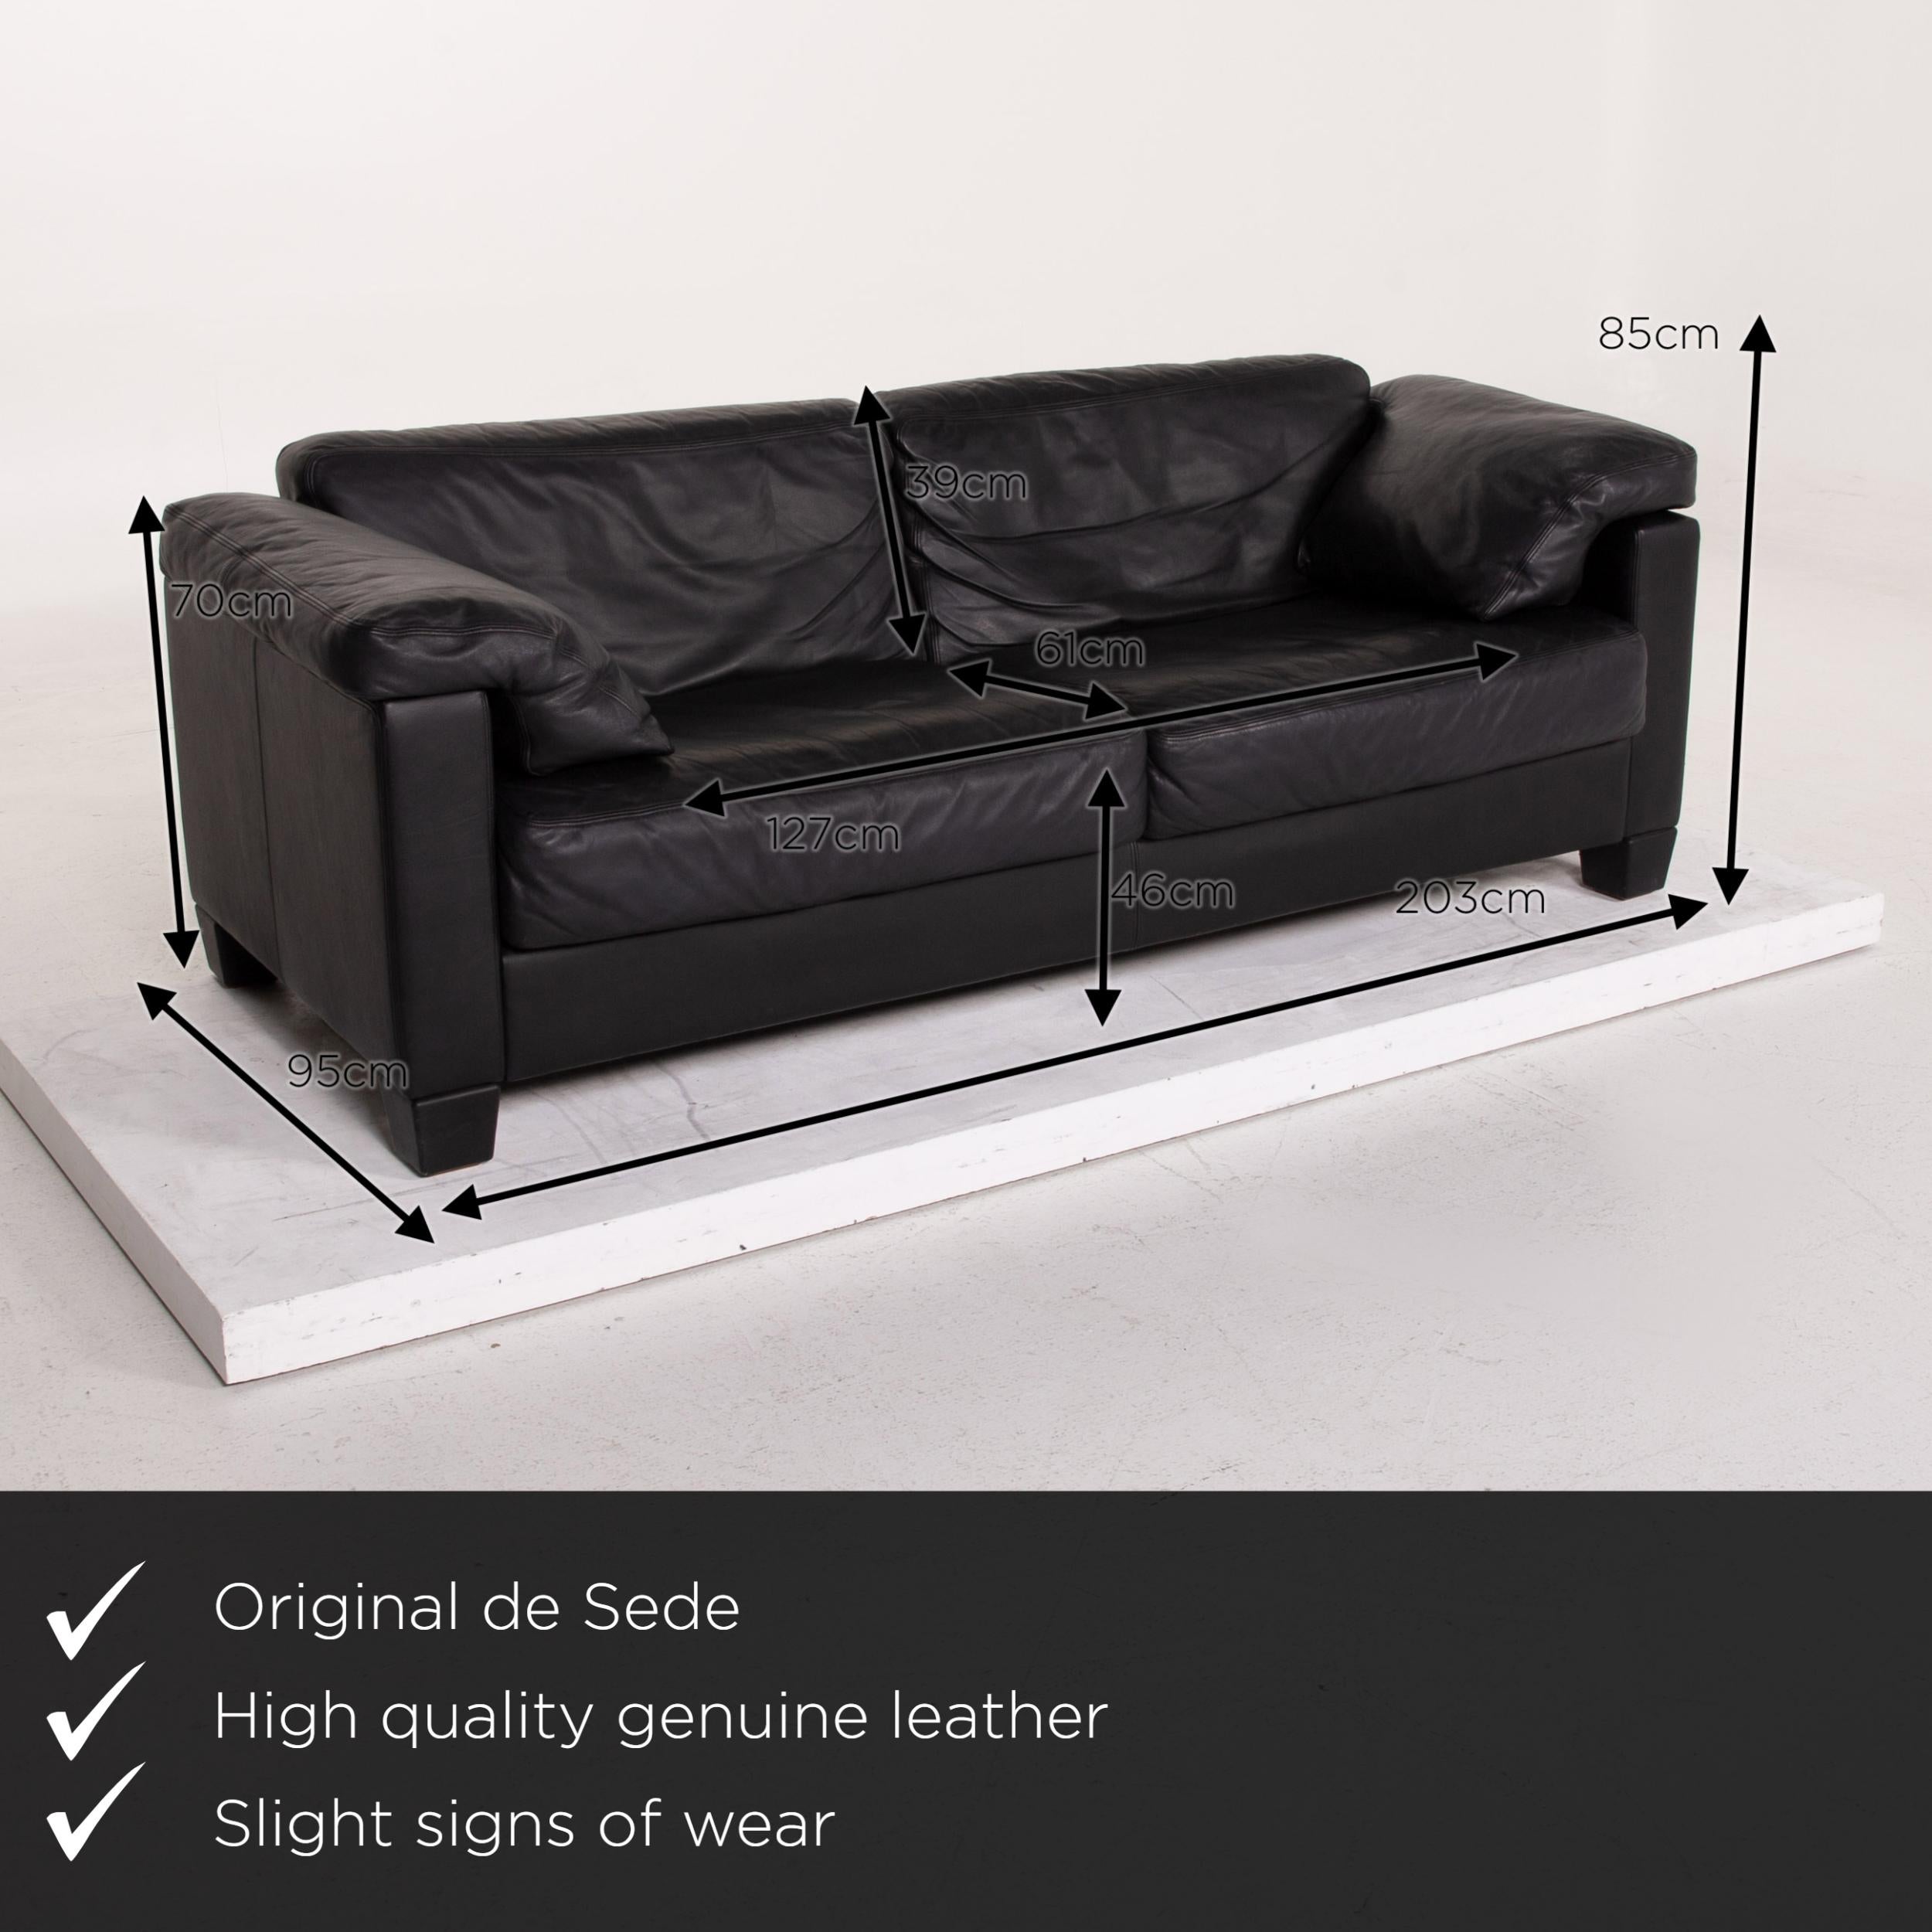 We present to you a De Sede ds 17 leather sofa black two-seat.
  
 

 Product measurements in centimeters:
 

Depth 95
Width 203
Height 85
Seat height 46
Rest height 70
Seat depth 61
Seat width 127
Back height 39.
 